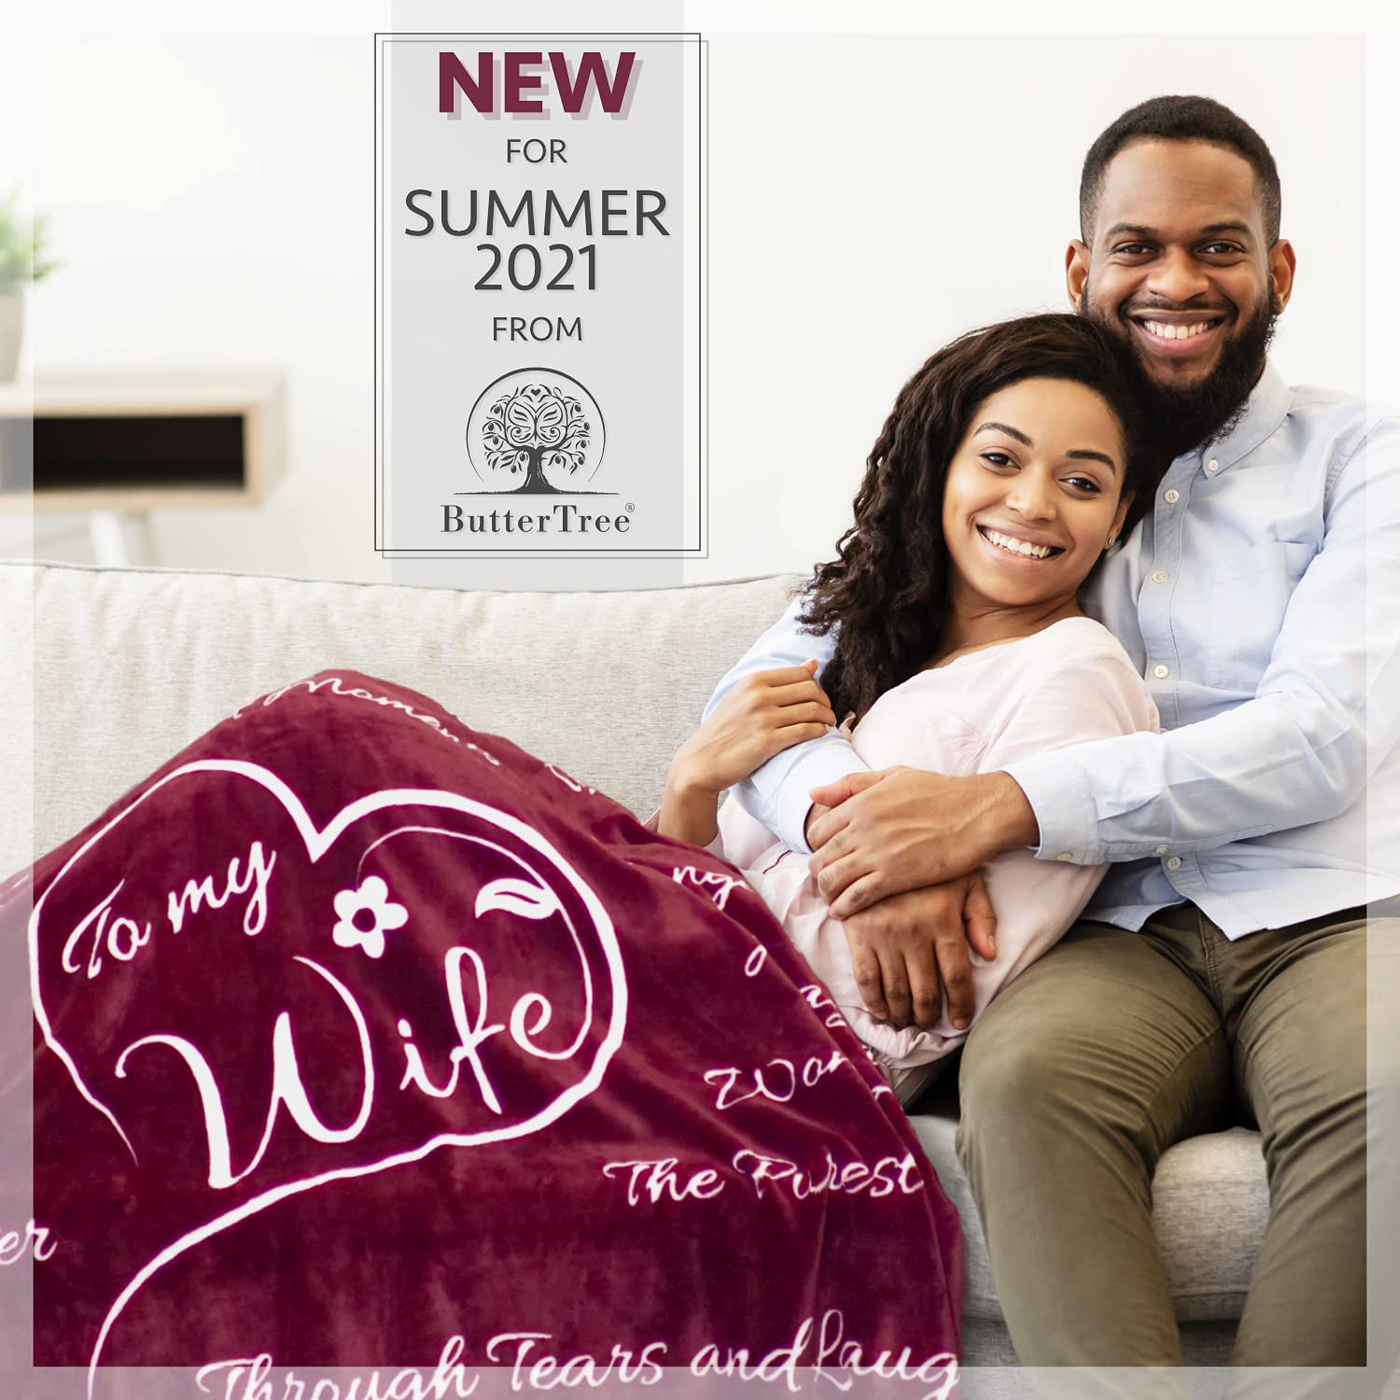 Wife Gift Blanket - I Love You Gifts for Women - Romantic Gifts for Wife Anniversary - Wife Birthday Gifts for Her from Husband for Valentines, Mothers Day or Christmas - Throw 50" x 65" (Merlot Red)